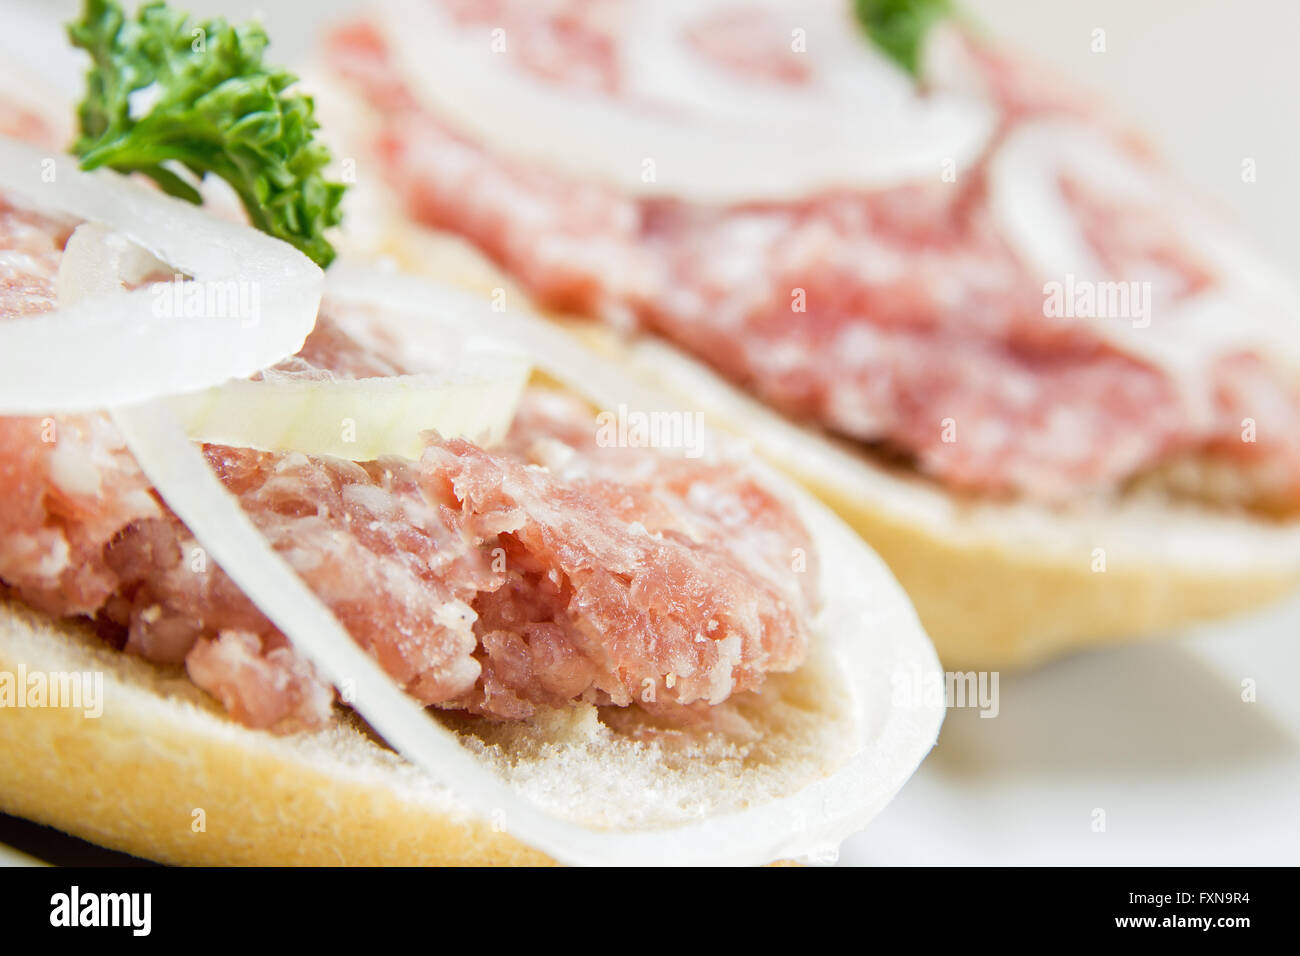 minced meat with bread Stock Photo